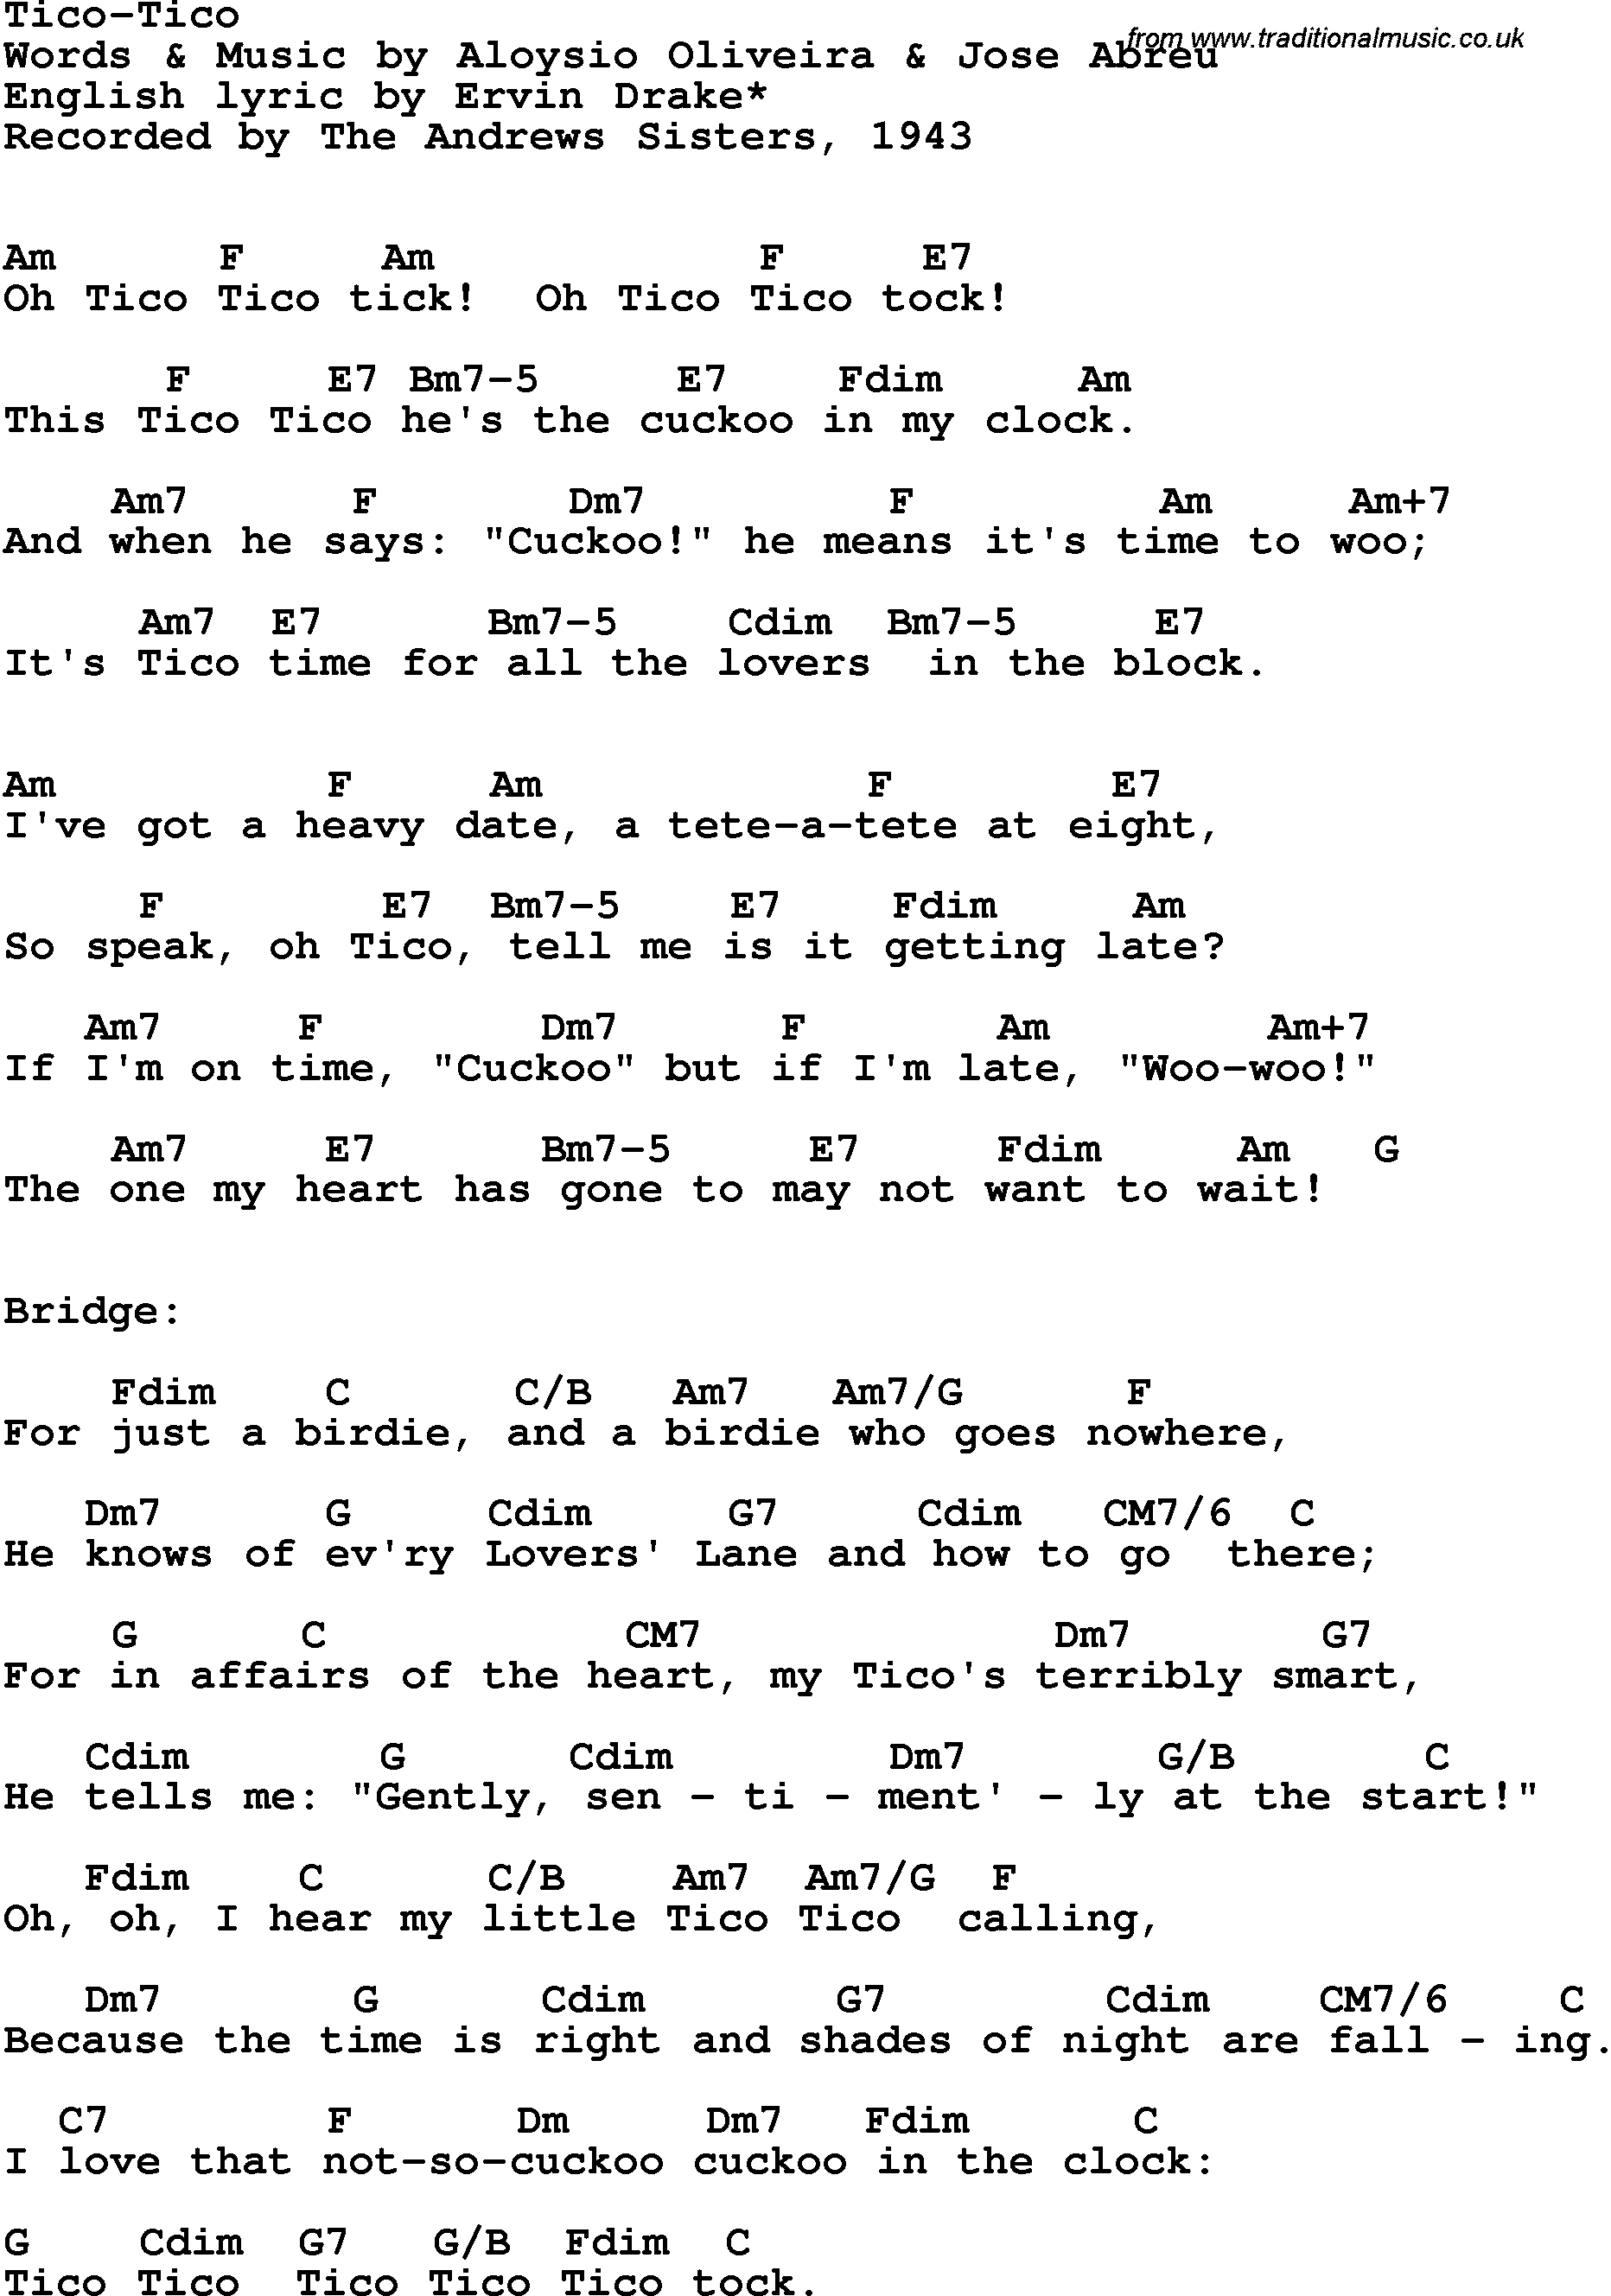 Song Lyrics with guitar chords for Tico Tico - Andrews Sisters, 1943